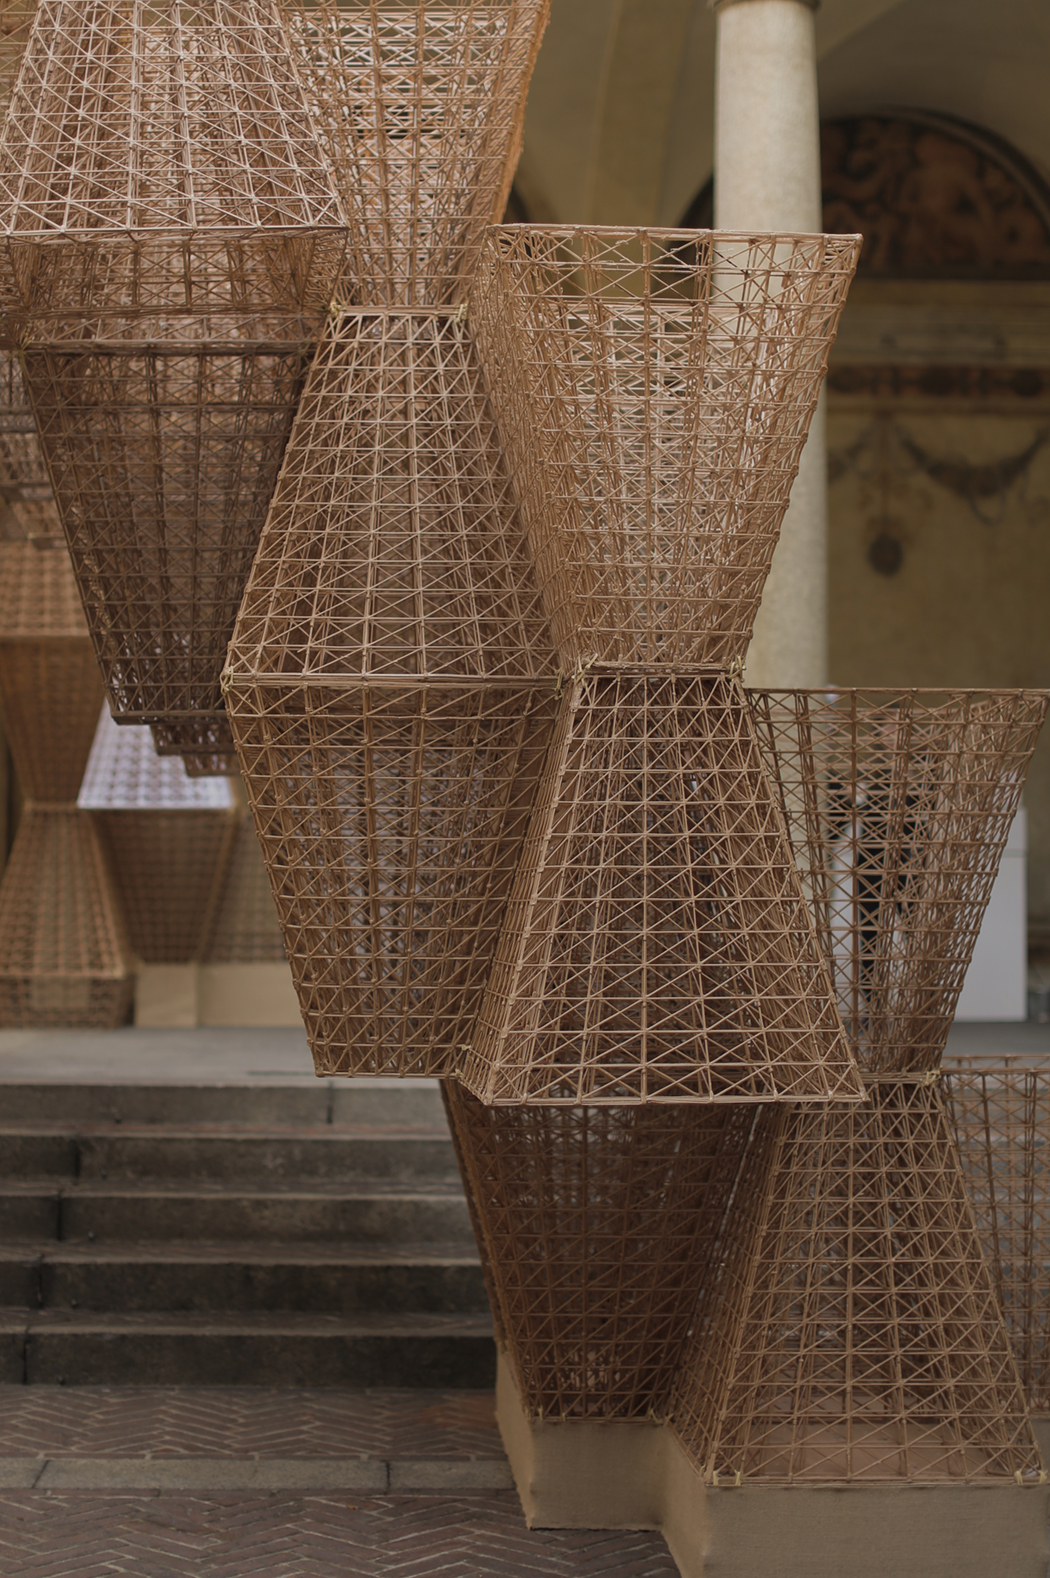 COS presents 'Conifera' - An Installation by Architect Mamou-Mani. By Fiona Dinkelbach